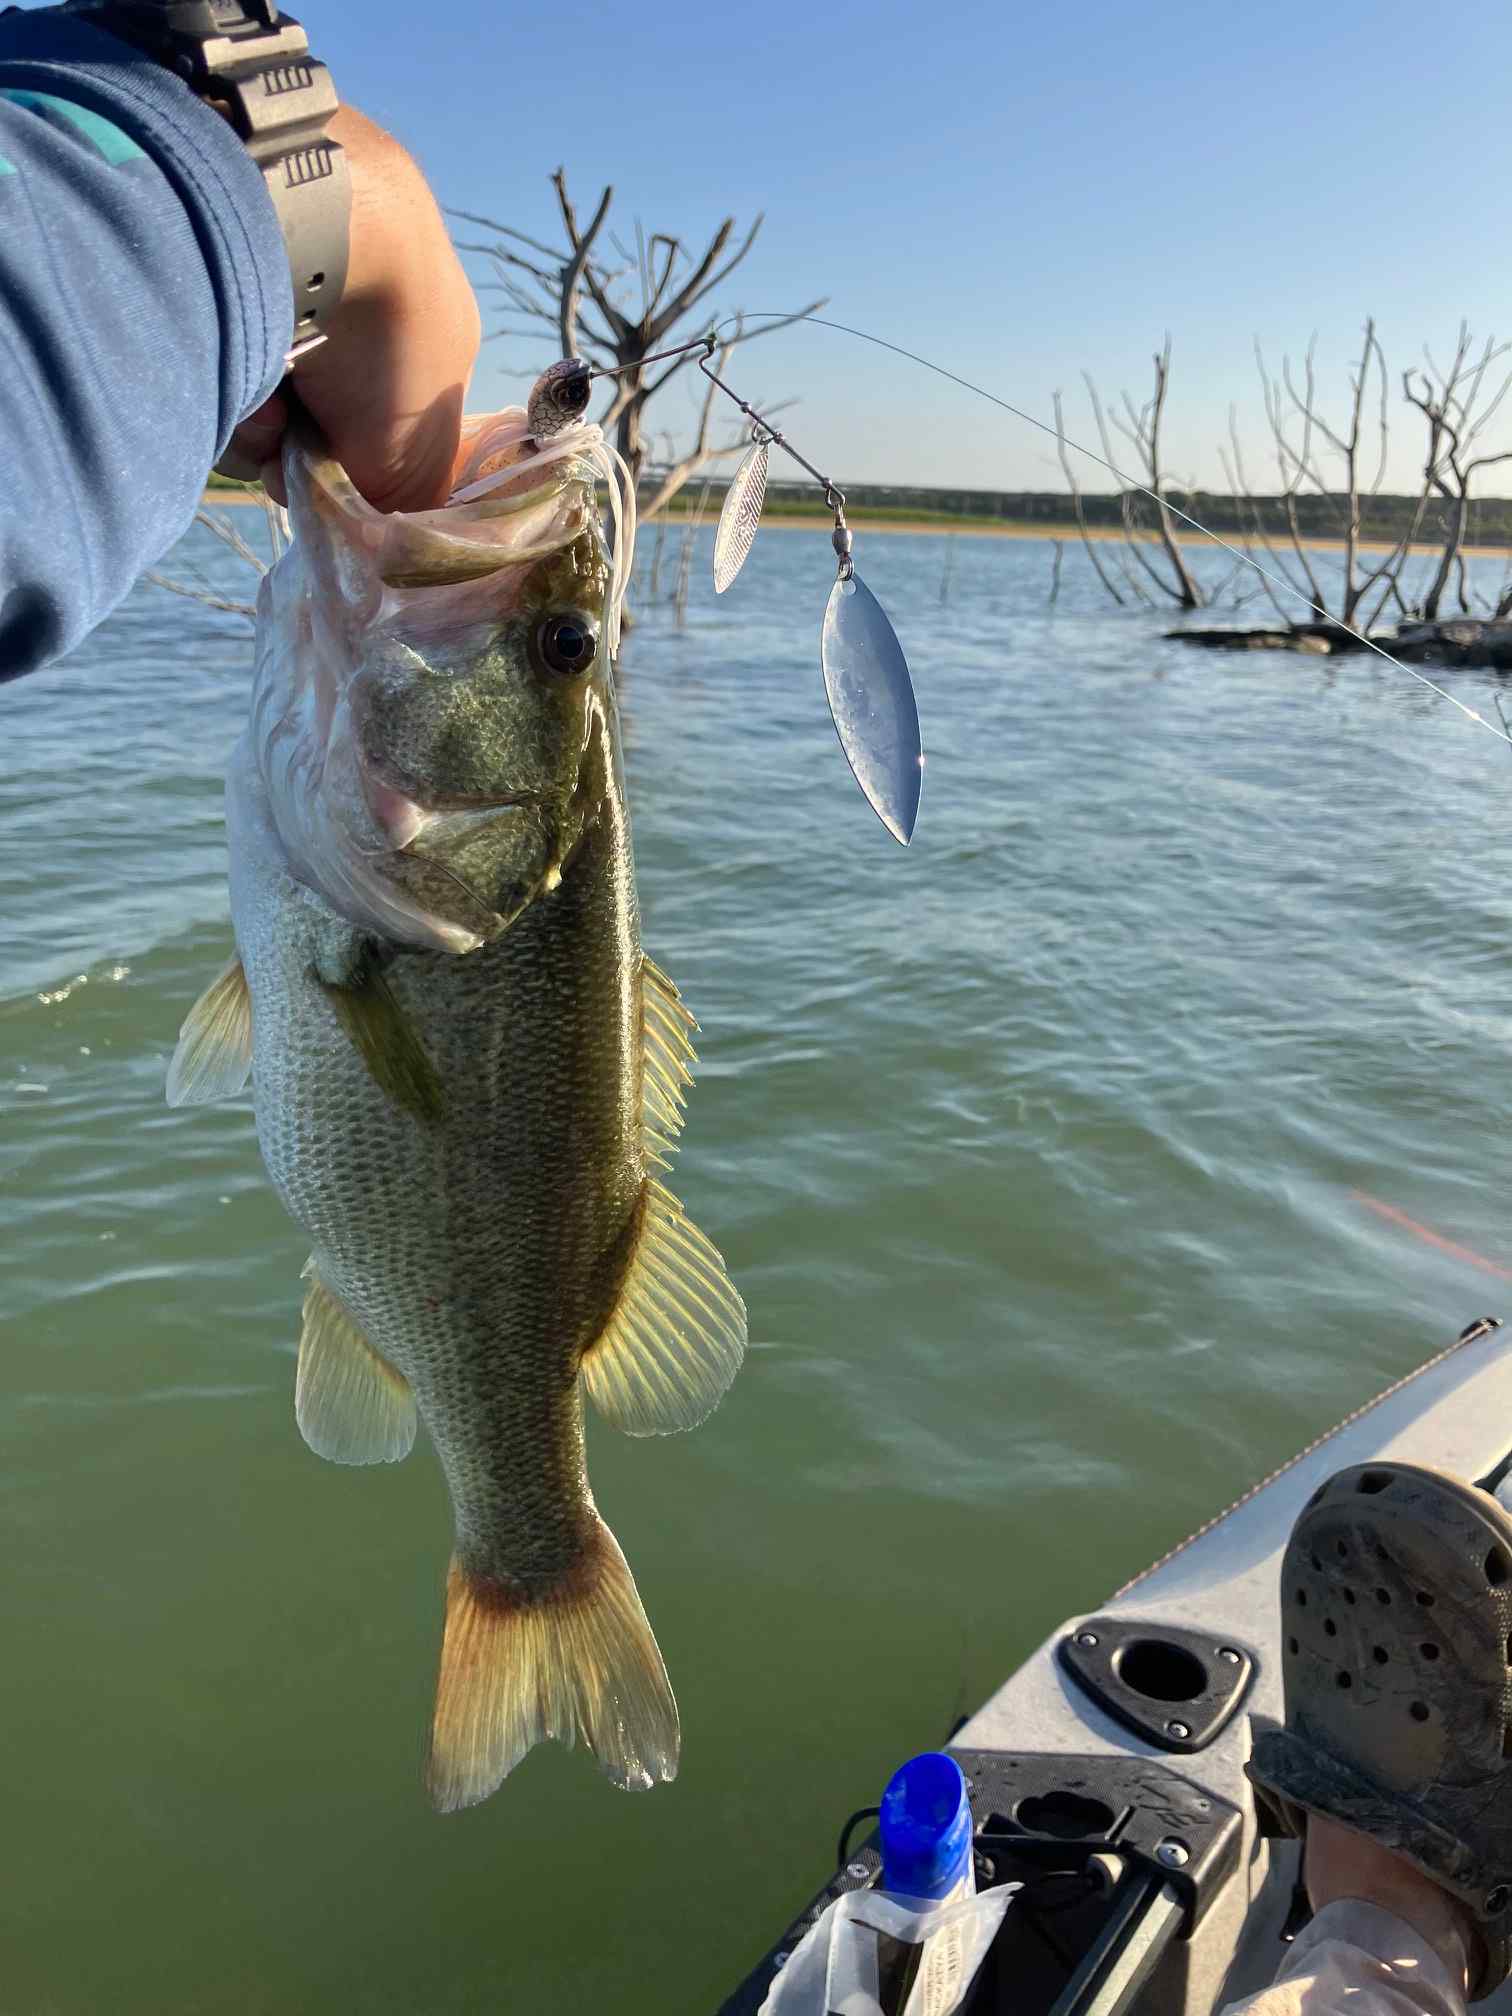 Latest Catch Pics Thread - Page 571 - Fishing Reports - Bass Fishing Forums